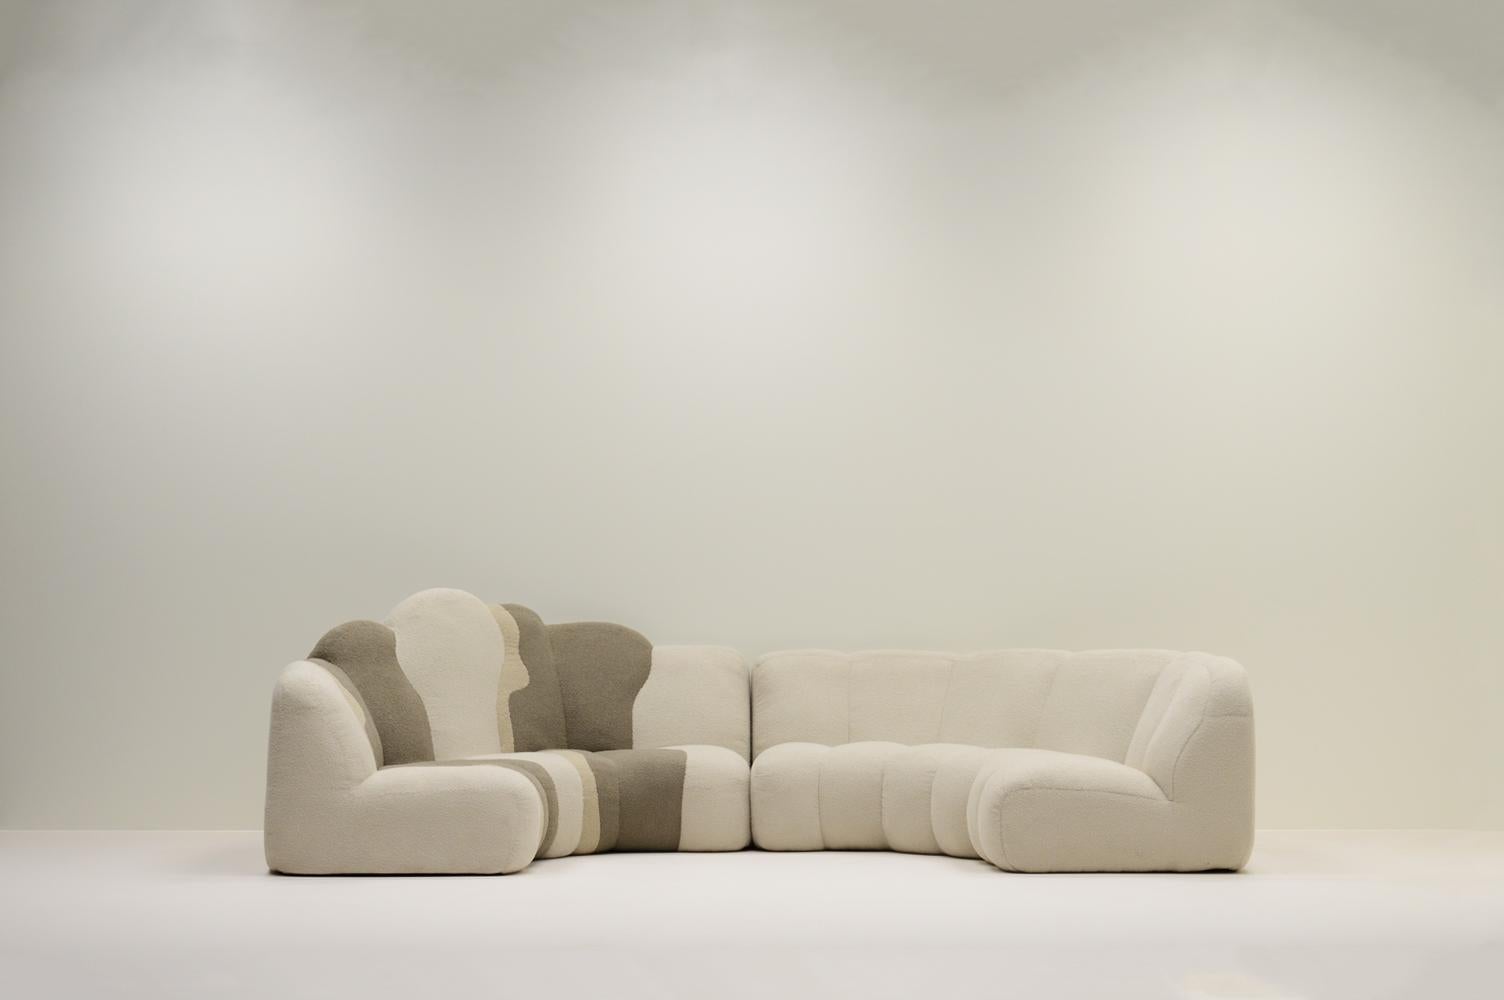 Playful sofa by Design studio Polster mit pep, Germany 80s. Every sofa they design is unique. Two sections make one large lounge sofa, but can be used seperately. Reupholstered in a fine teddy fabric. True to the original design, the left section is